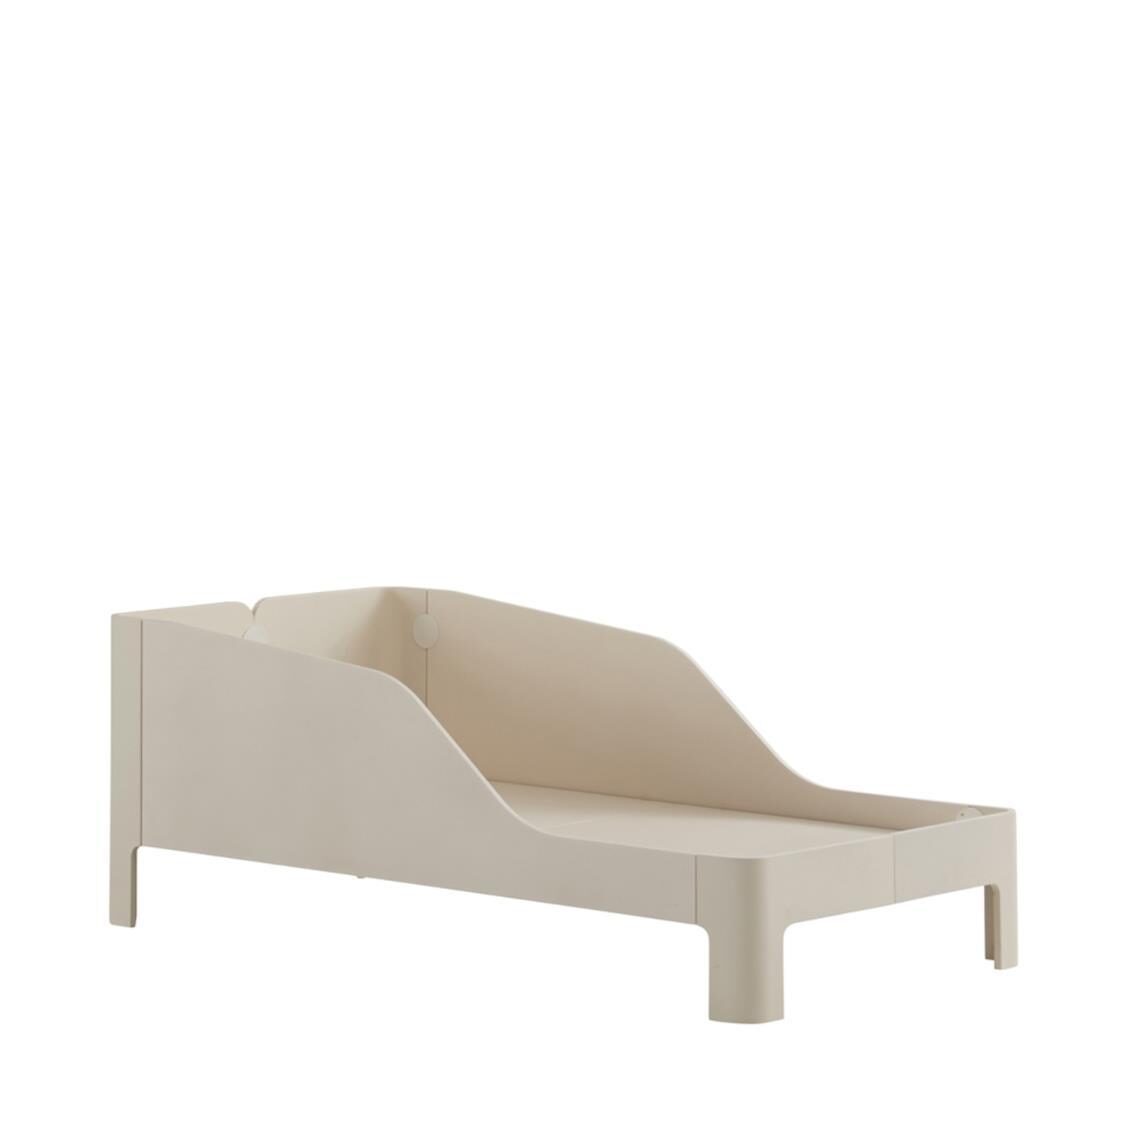 Iloom Tinkle Pop 1 Story Bed IV Ivory